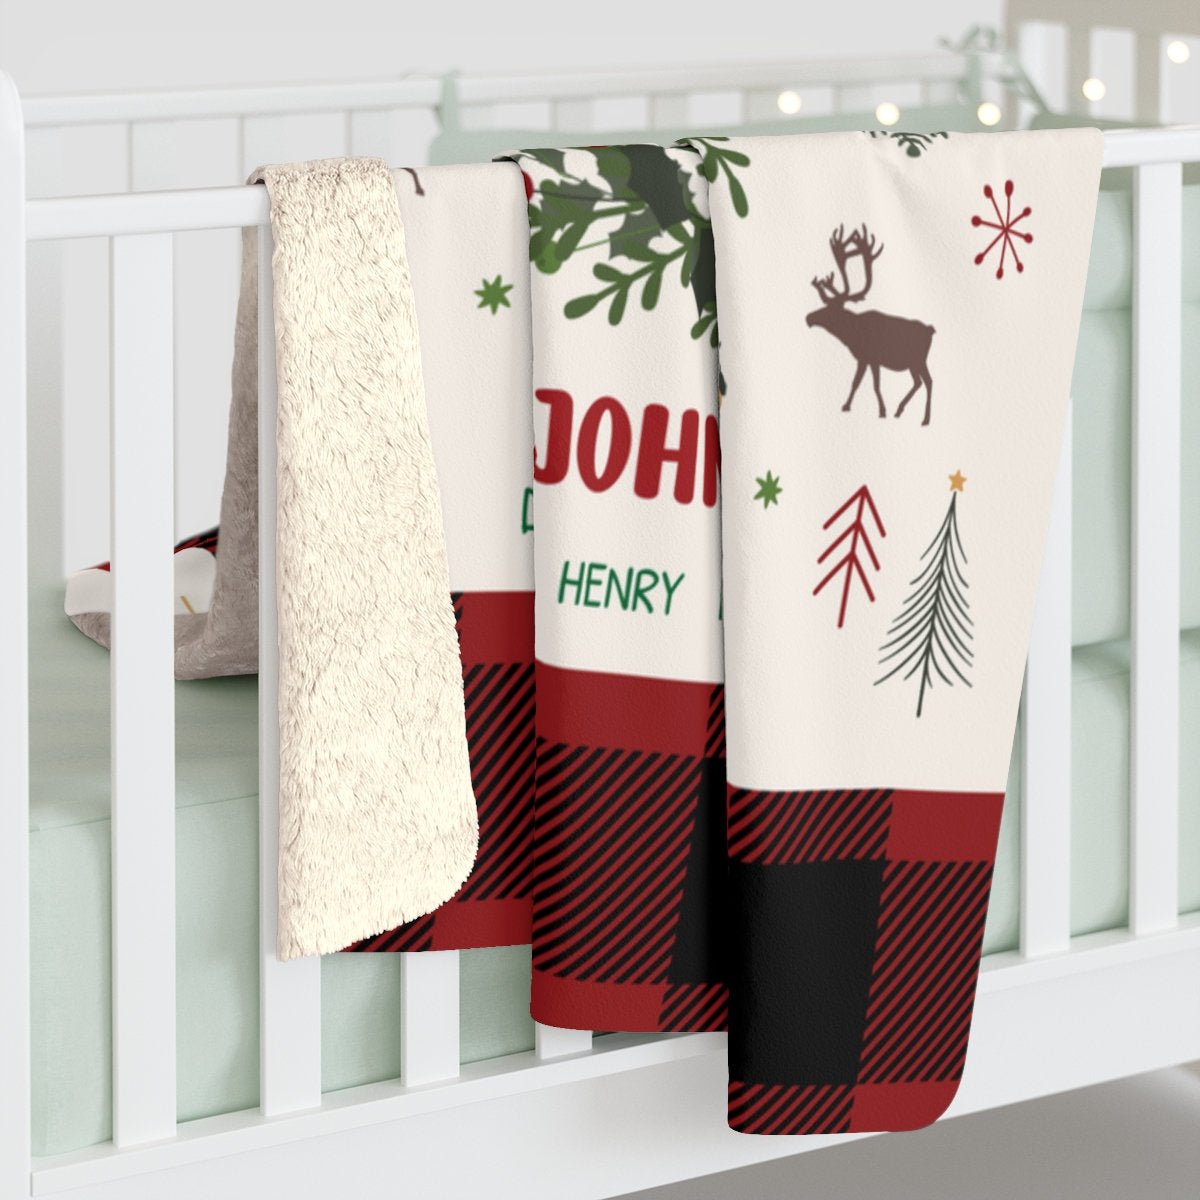 Personalized Family Holiday Sherpa Blanket